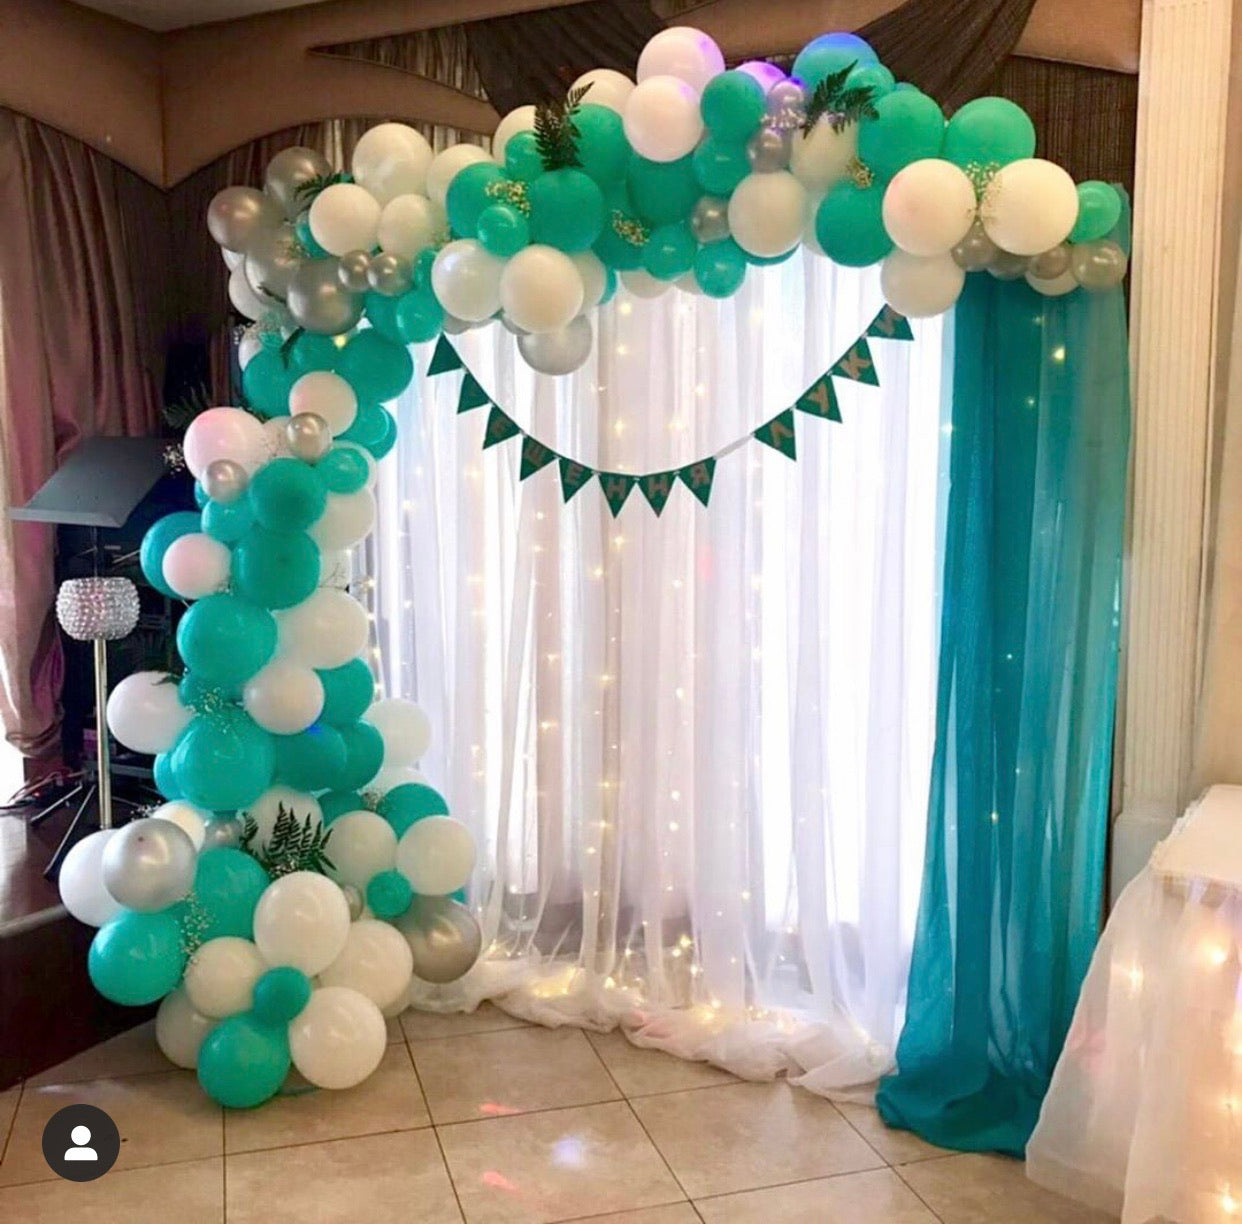 “Turquoise “ balloons decorations